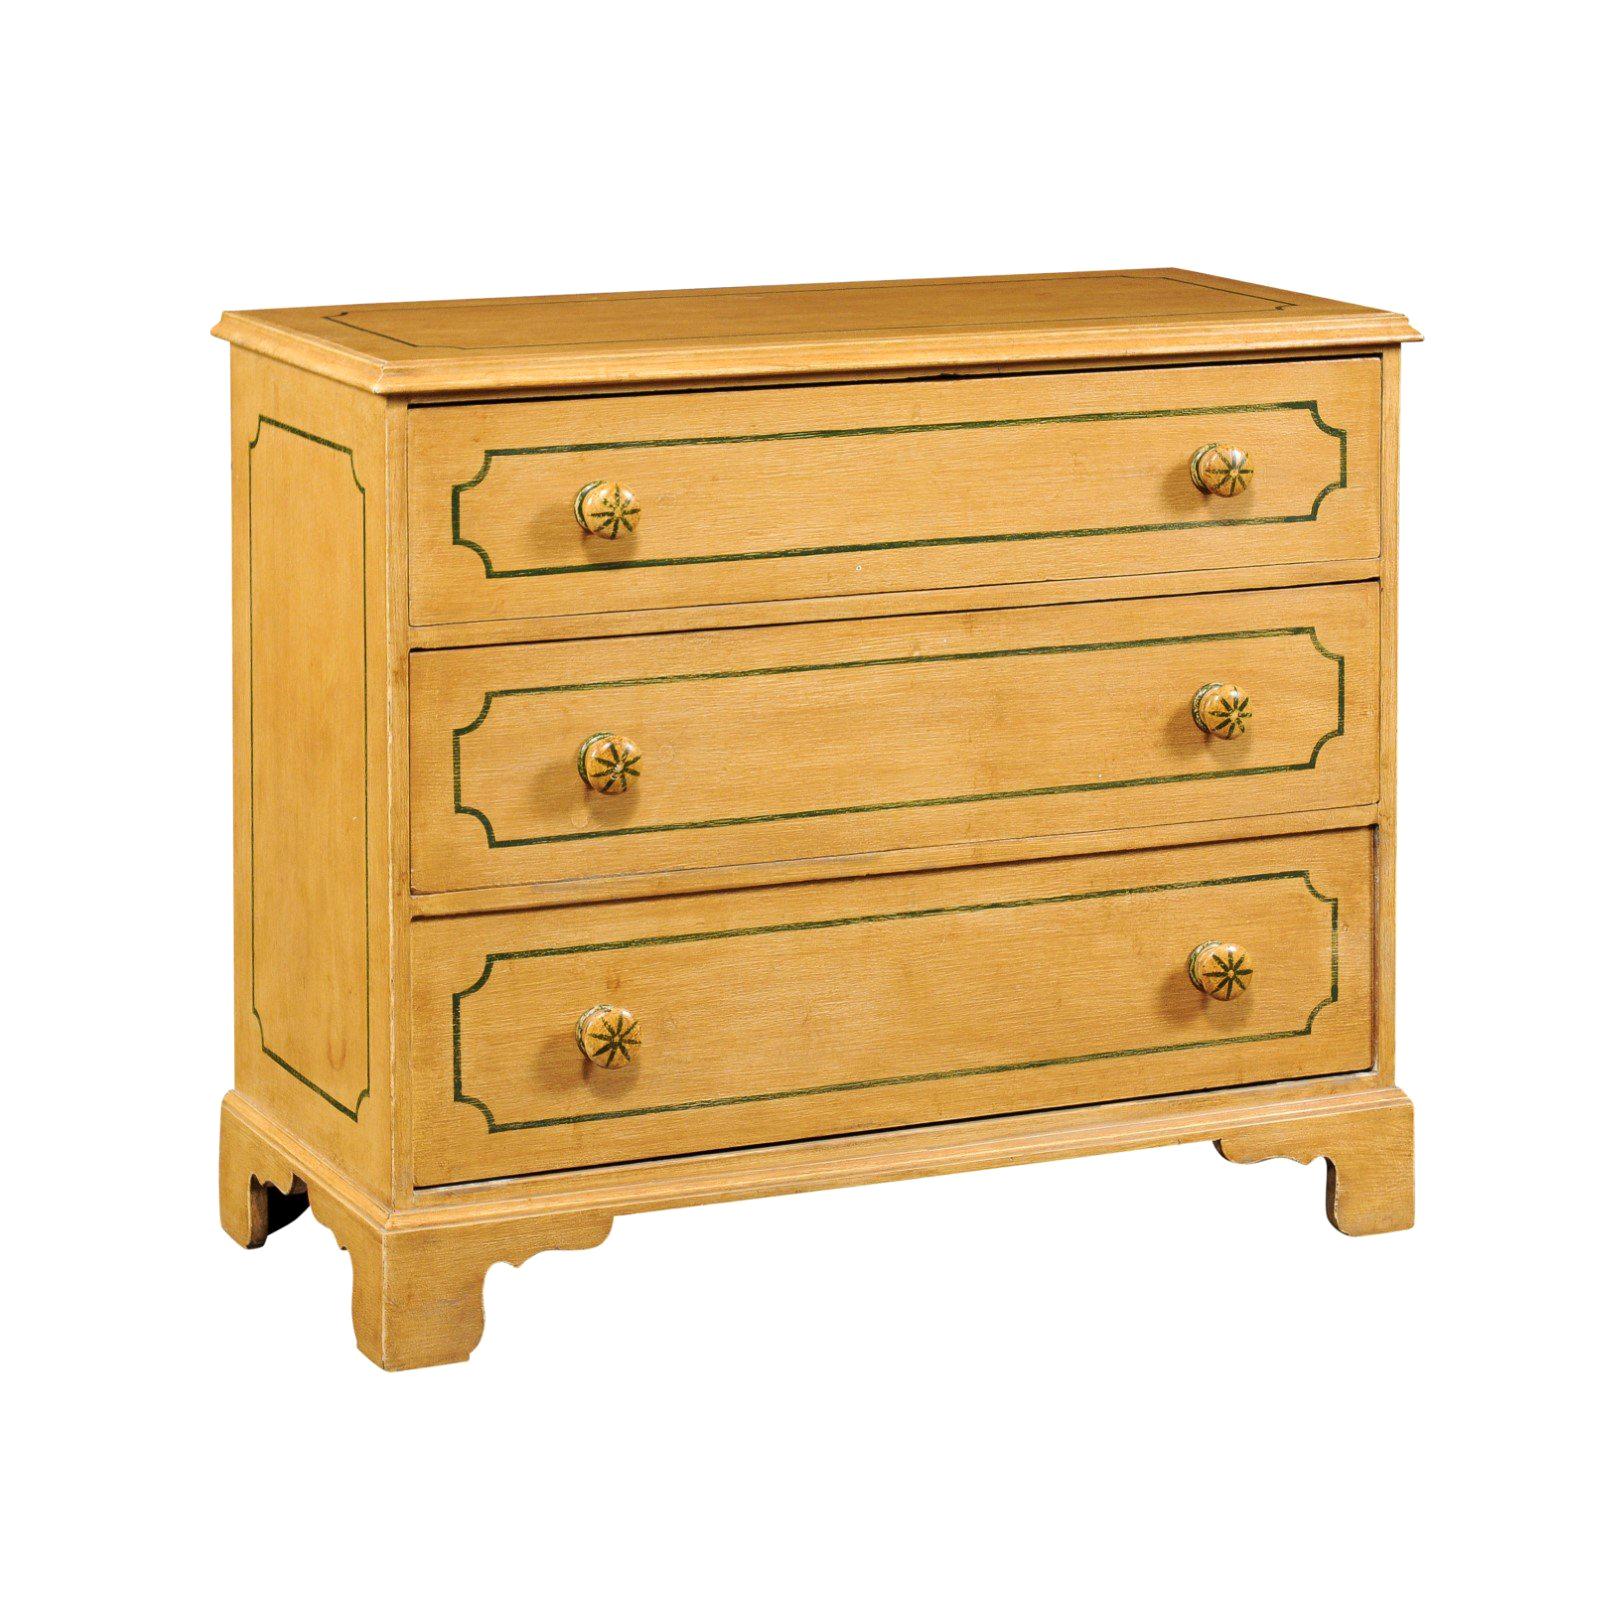 Vintage 1950s English Painted Three-Drawer Commode with Yellow Painted Finish